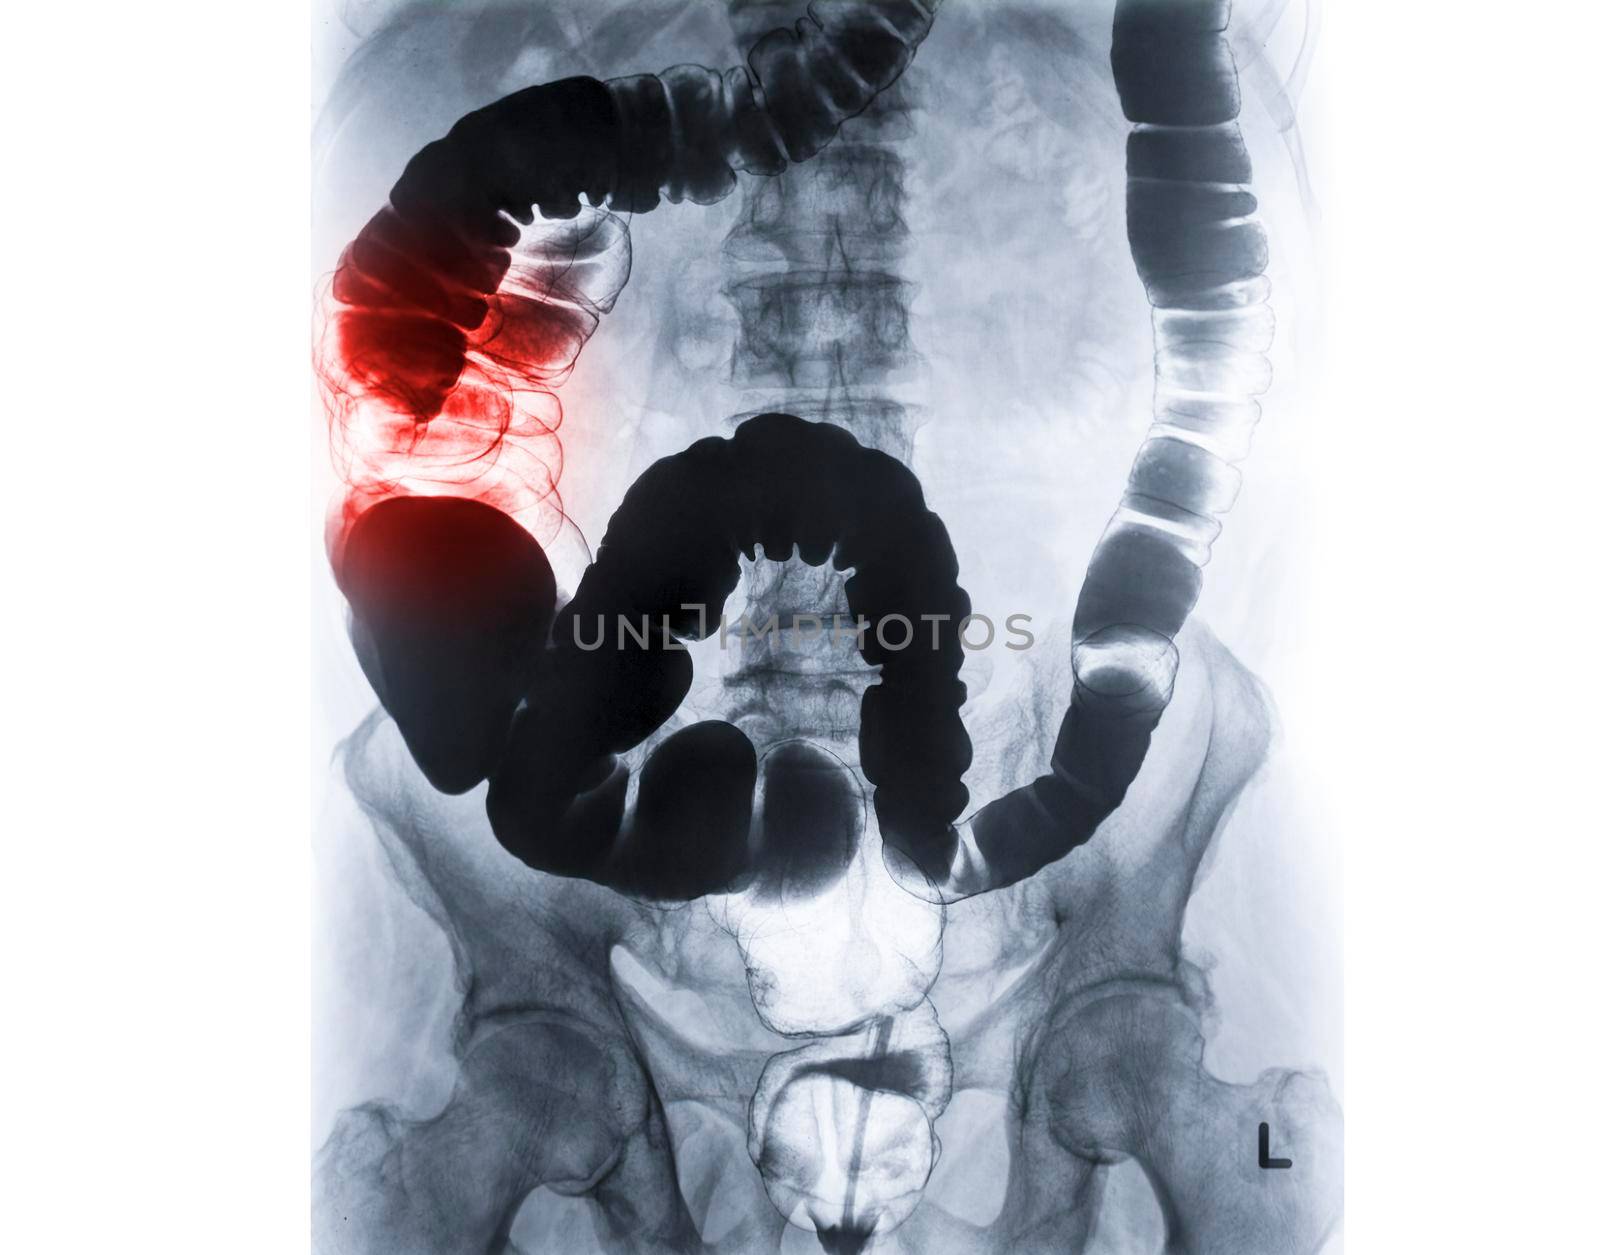 Barium enema or BE is image of large bowel after injection of barium contrast fill into colon under fluoroscopic control by samunella